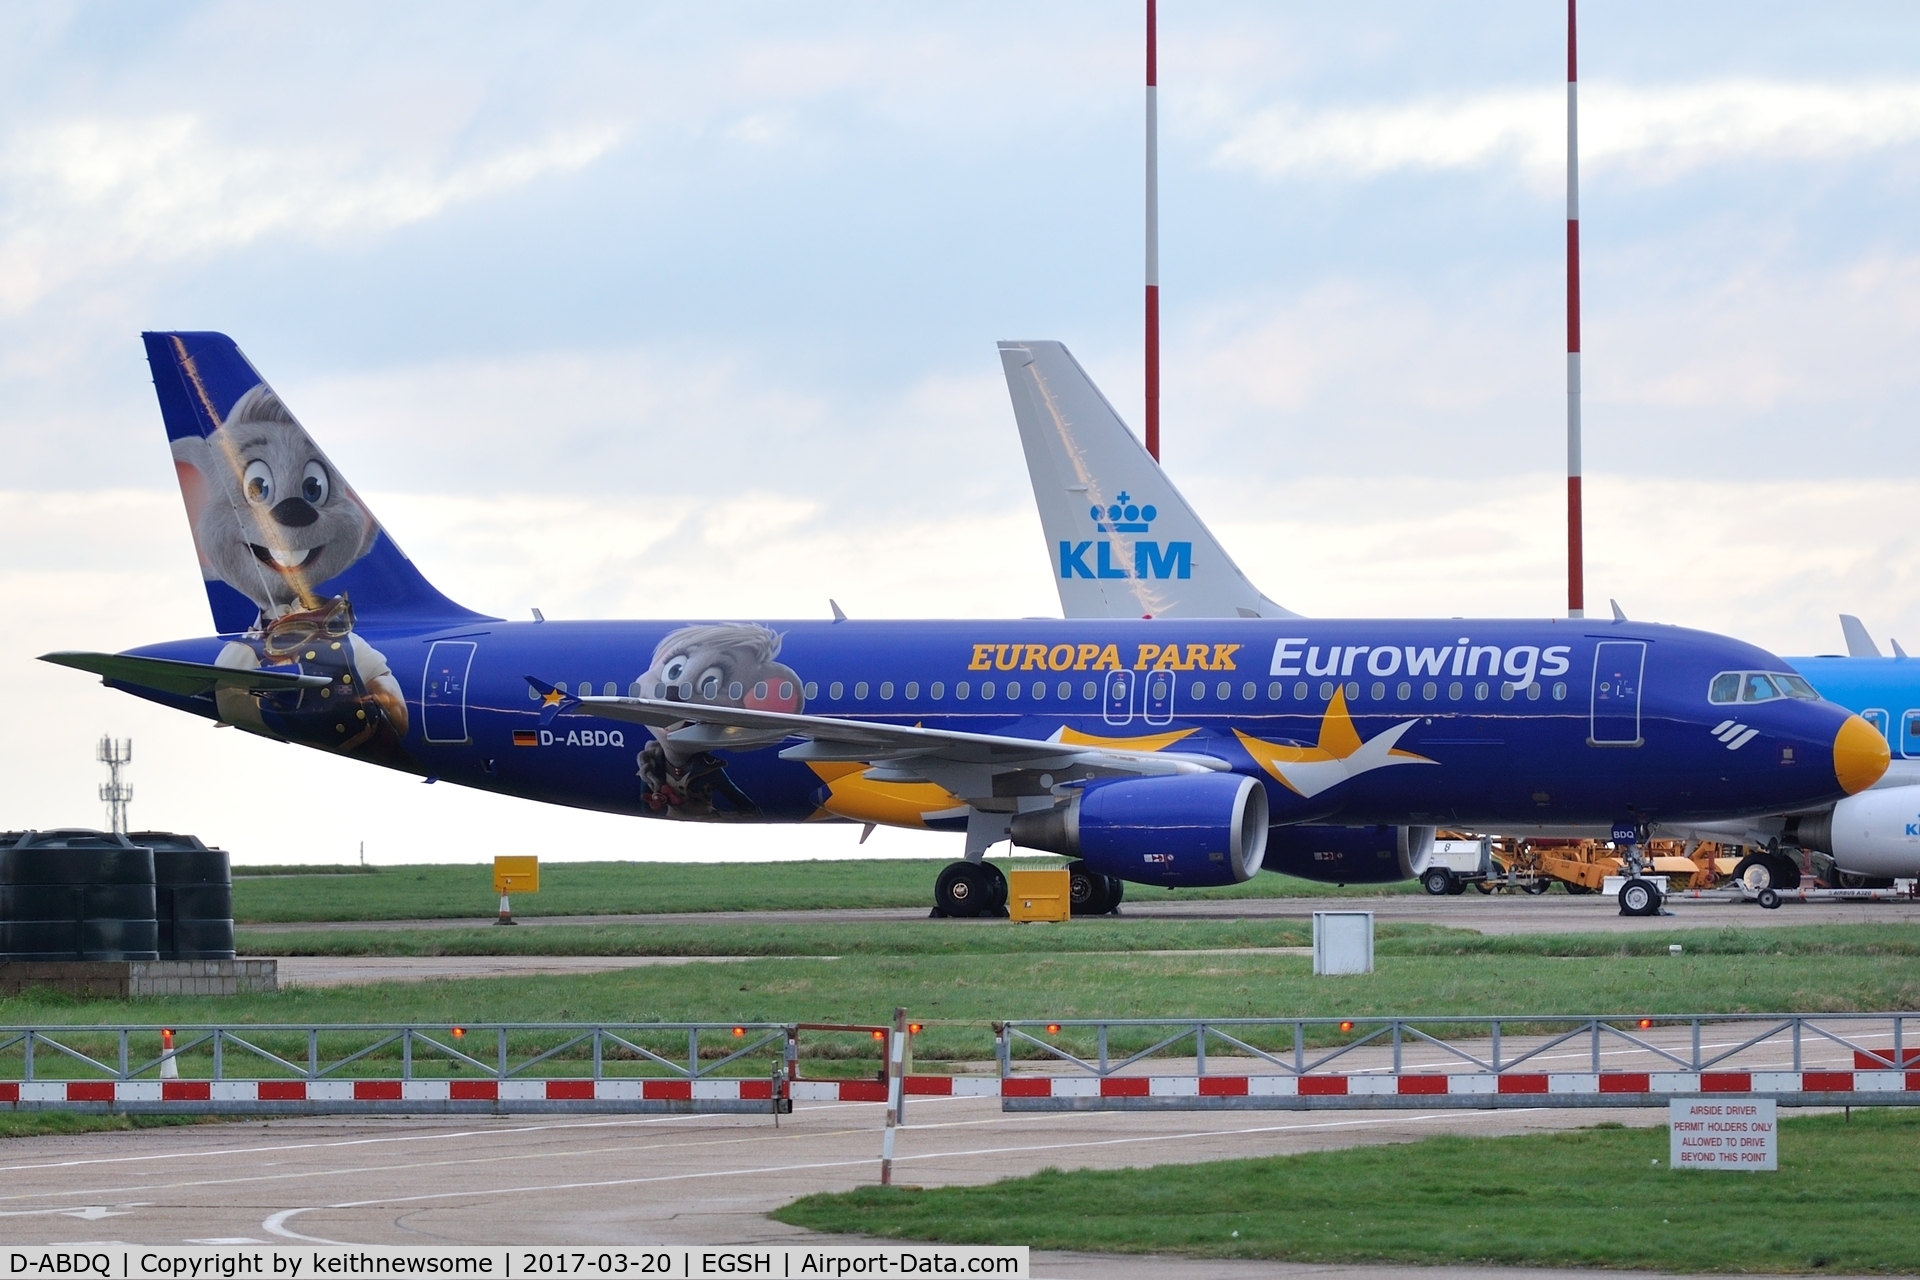 D-ABDQ, 2007 Airbus A320-214 C/N 3121, To Eurowings 'Europa Park' logo jet.